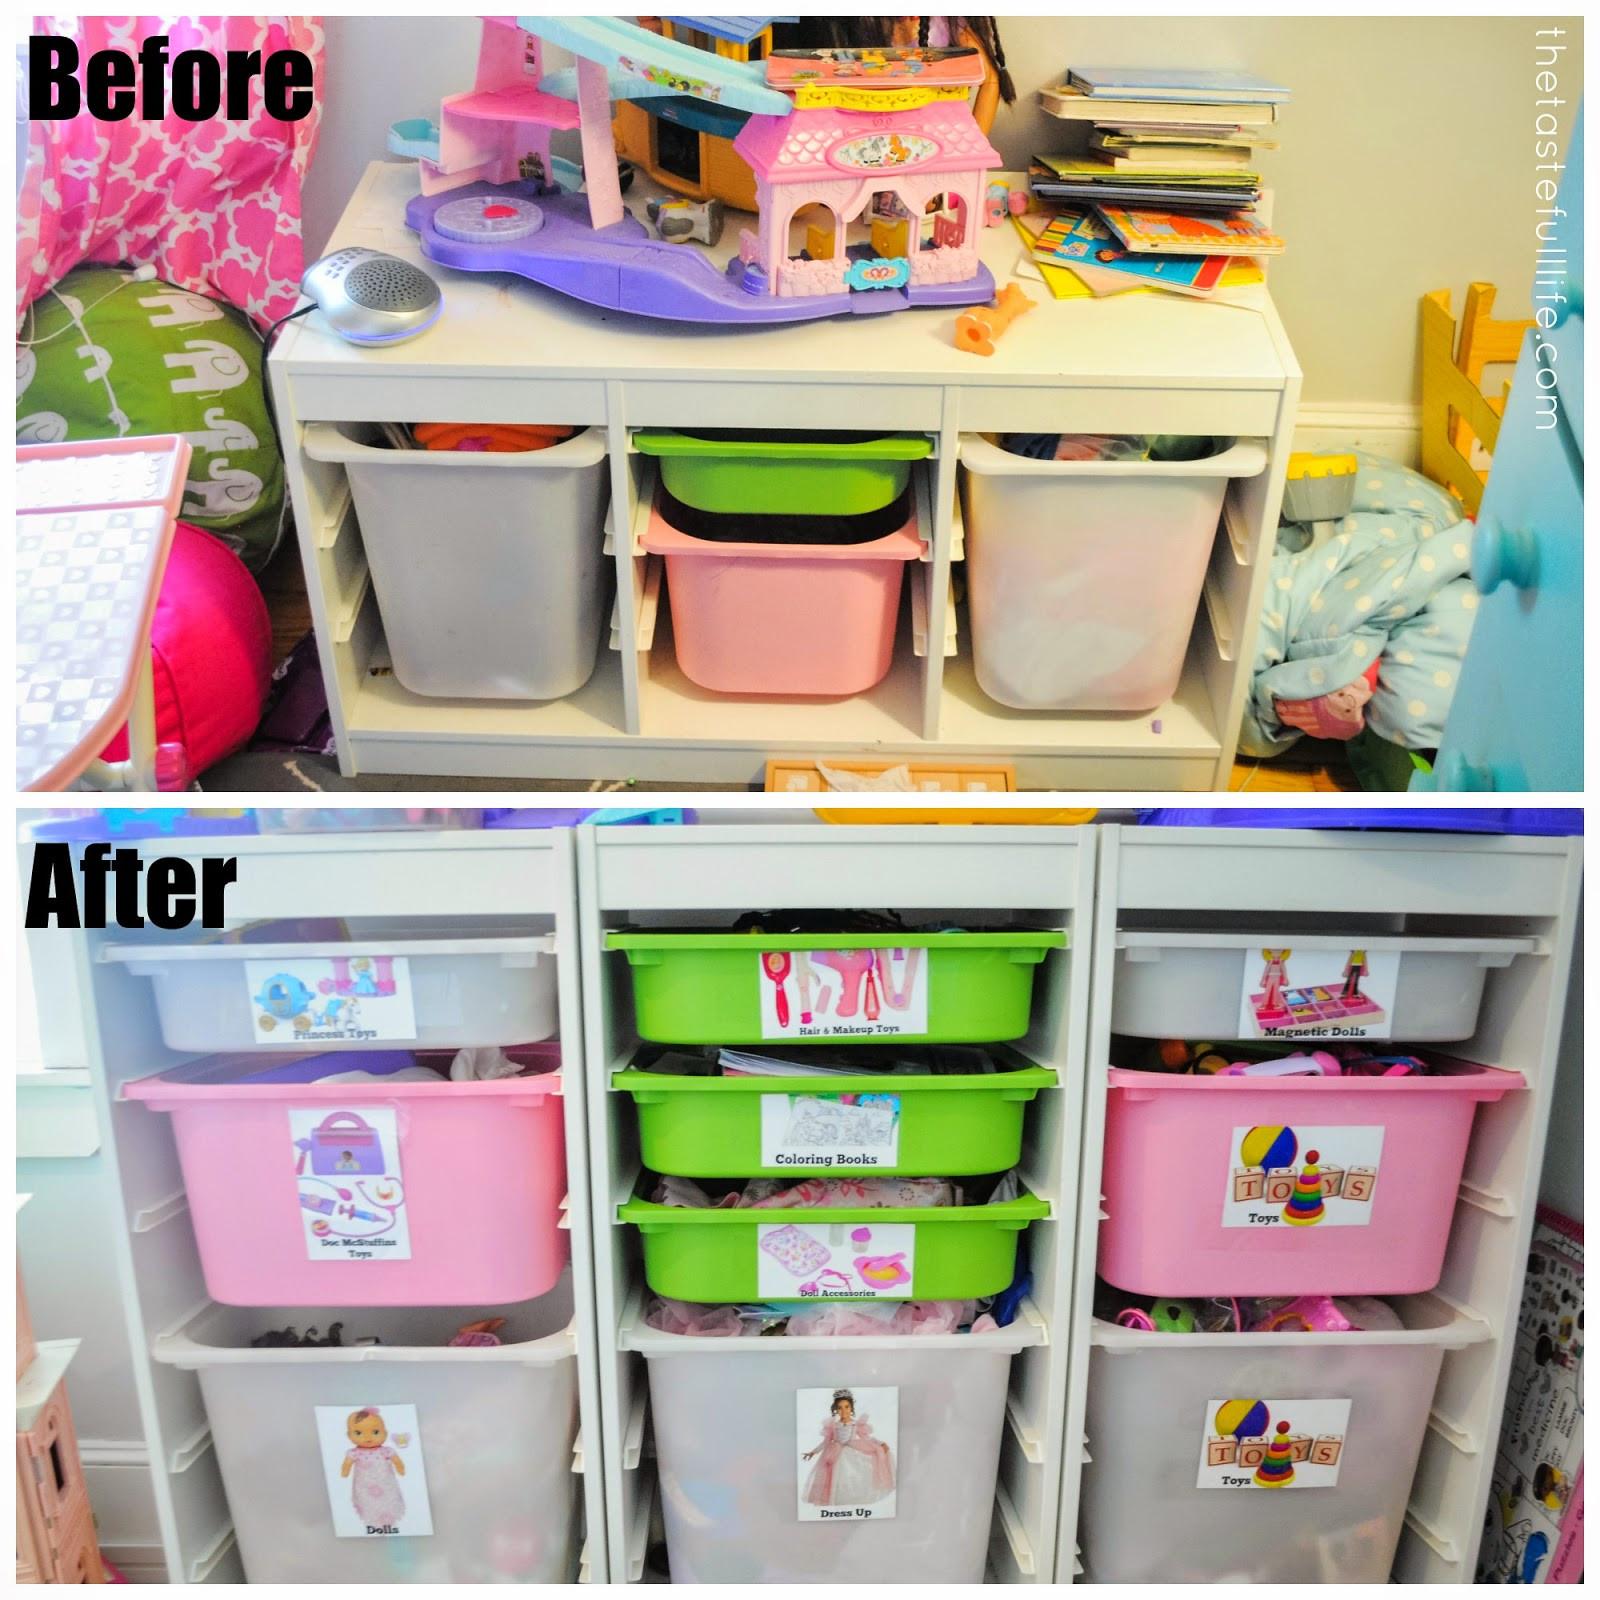 Storage Solutions For Kids Room
 The Beauty of The Best House How to Organize Kids Room